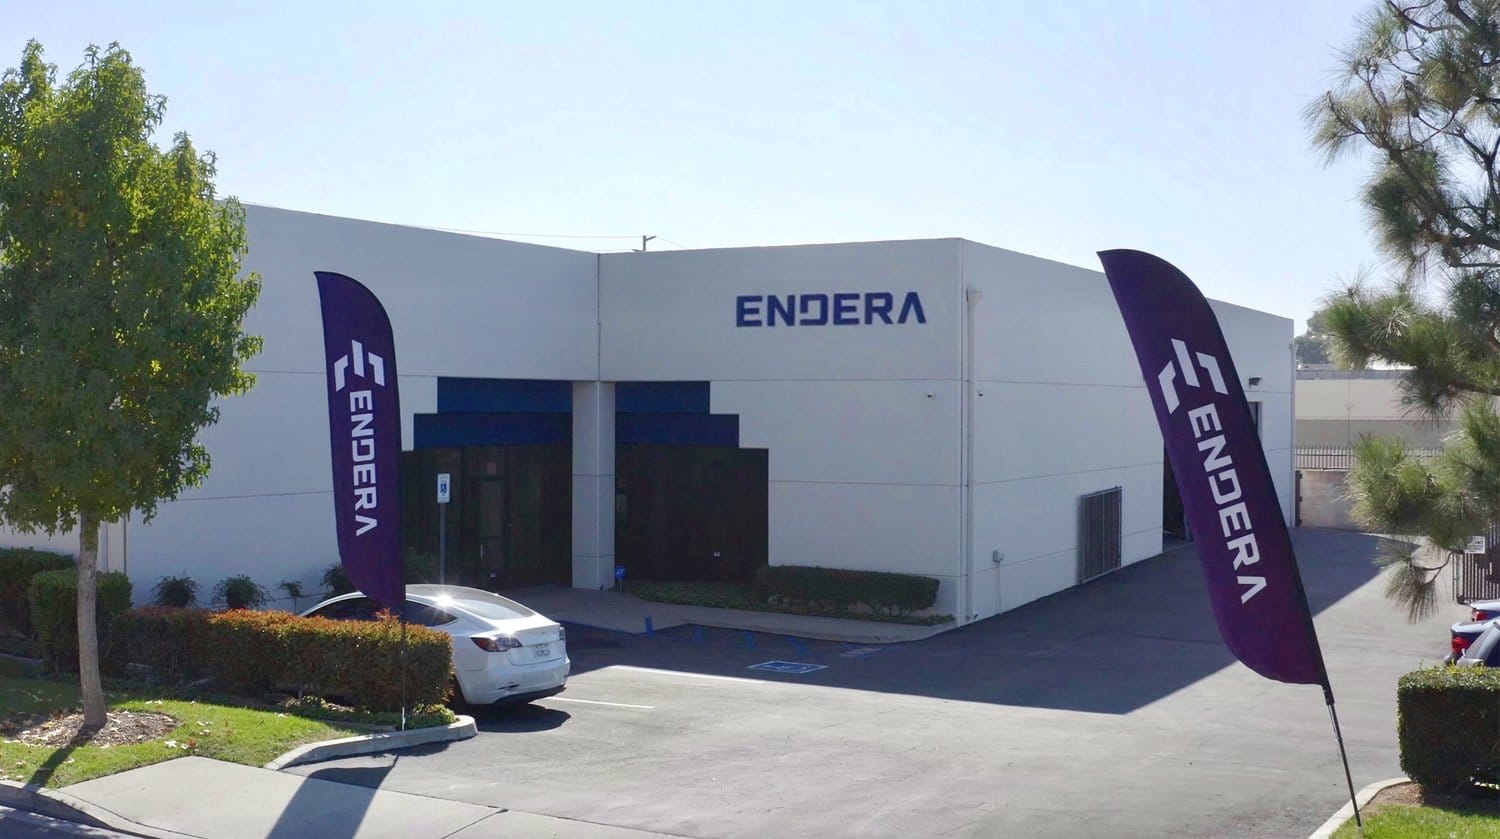 ENDERA ANNOUNCES EXPANSION OF ITS RESEARCH & DEVELOPMENT FACILITY